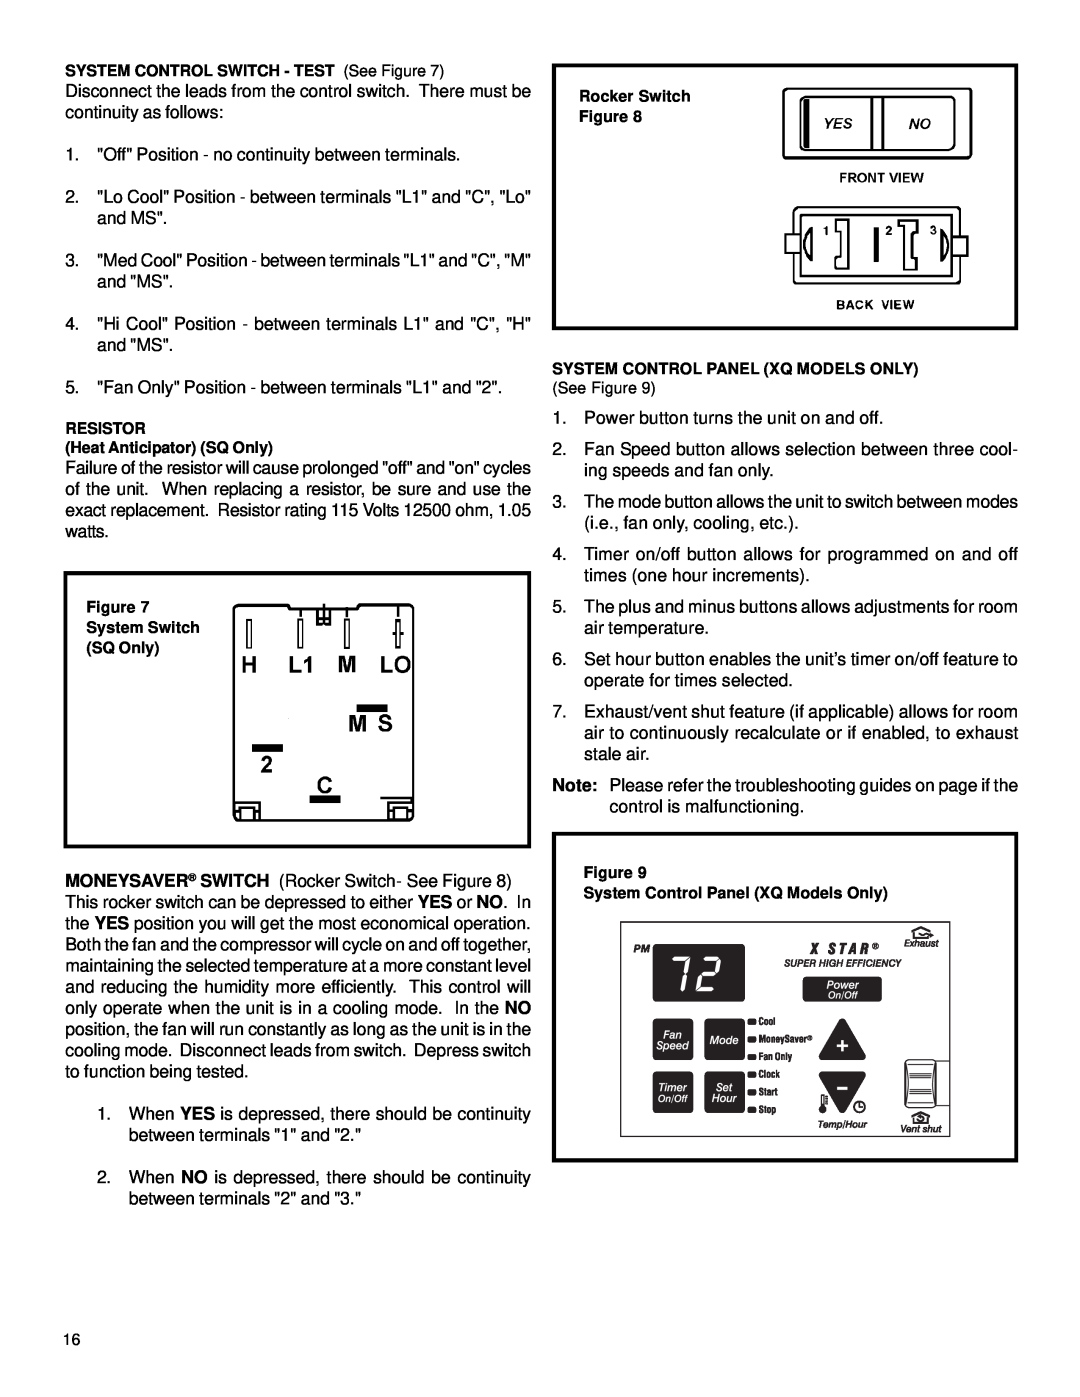 Friedrich 2003 service manual Off Position - no continuity between terminals 